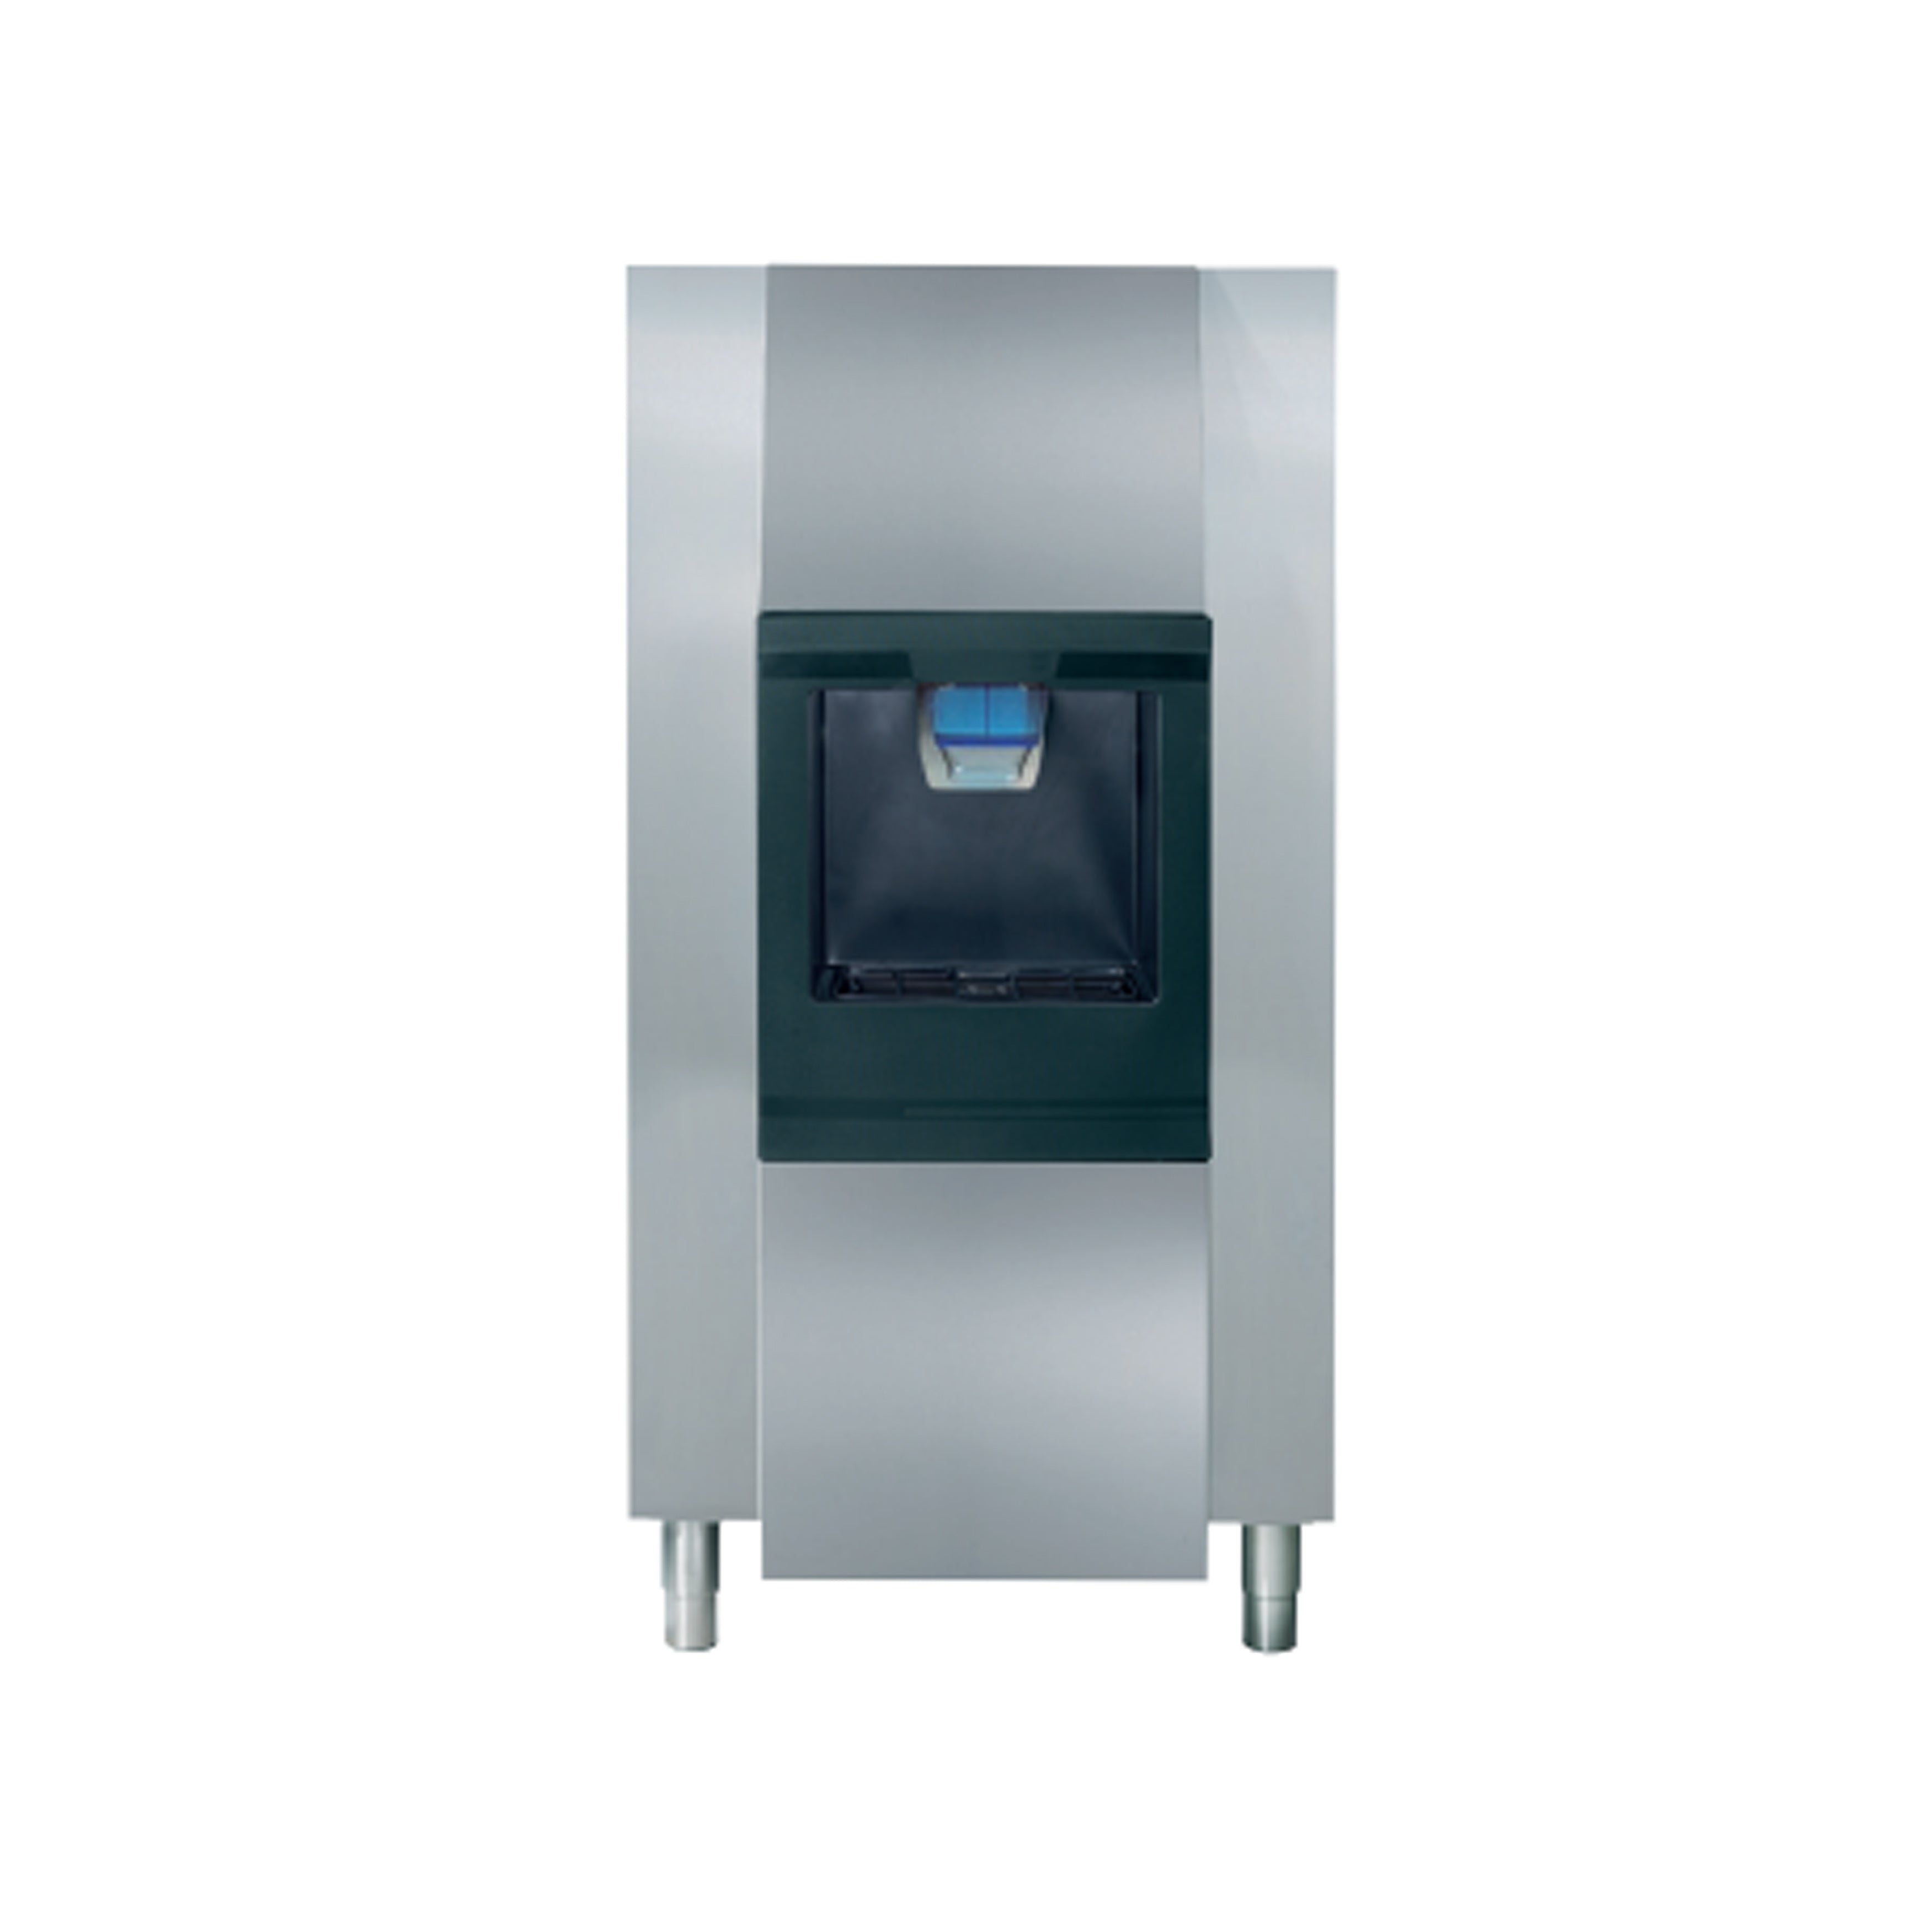 ITV - SIRION DHD 200-30 W, Commercial Ice Dispenser for Spika Ice Machine Series Ice Cube Maker 183lbs